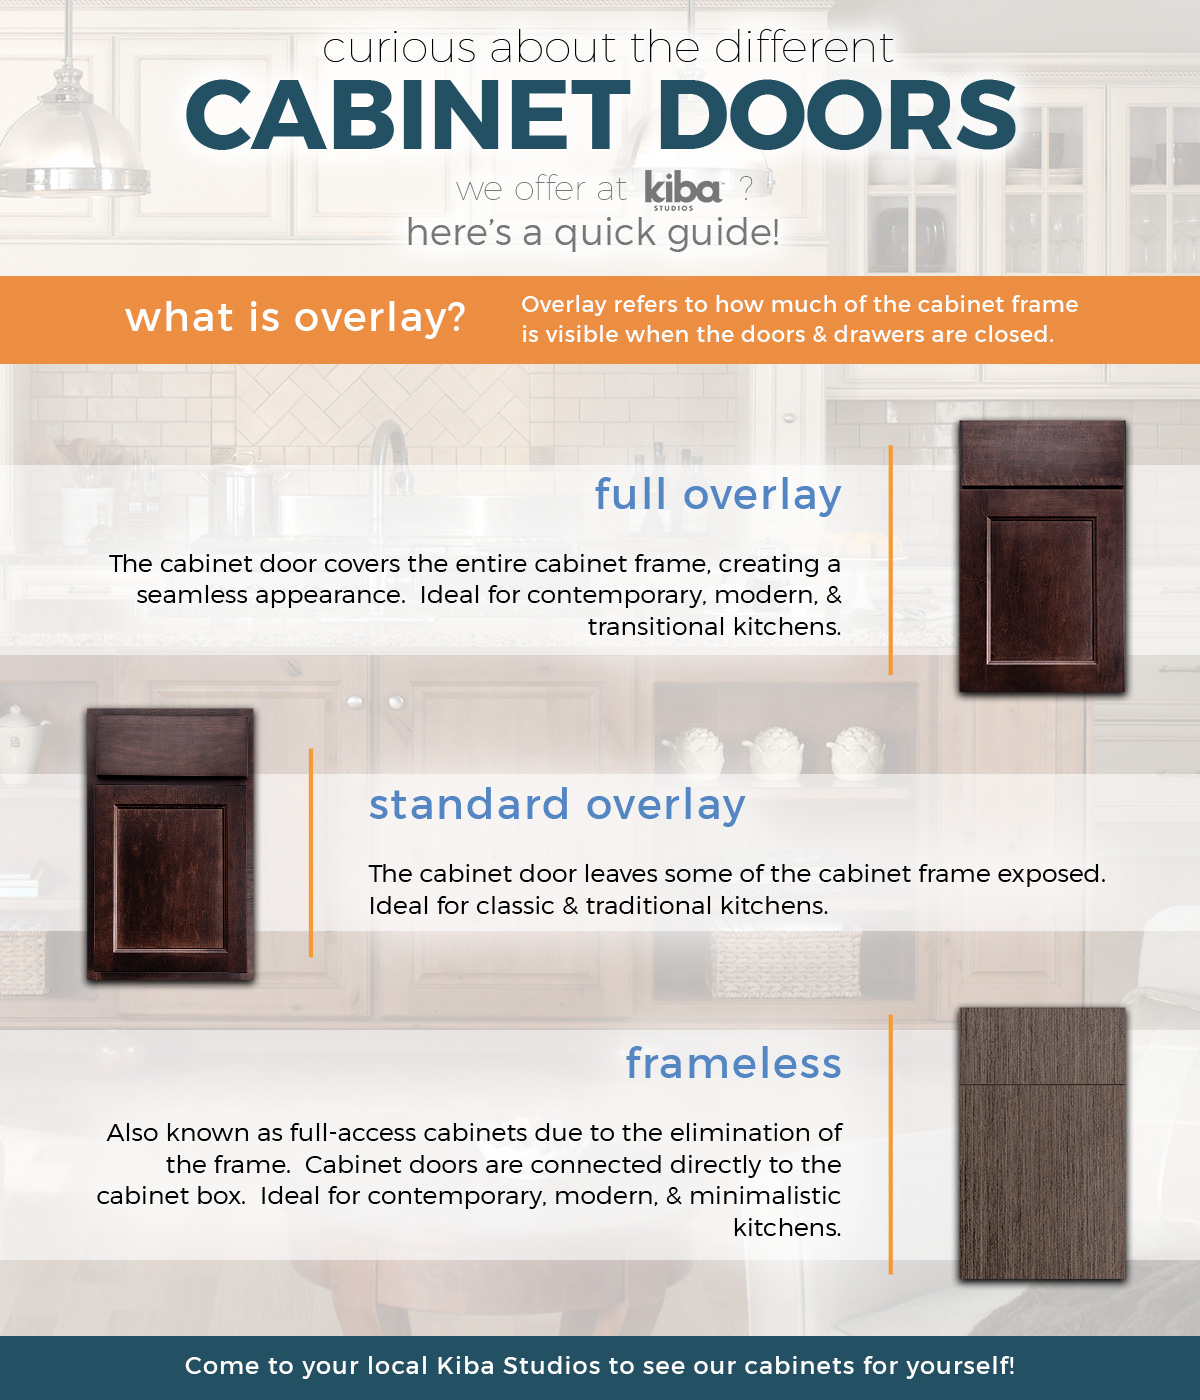 Kiba-infographic-cabinettypes-5bd87872a78c2